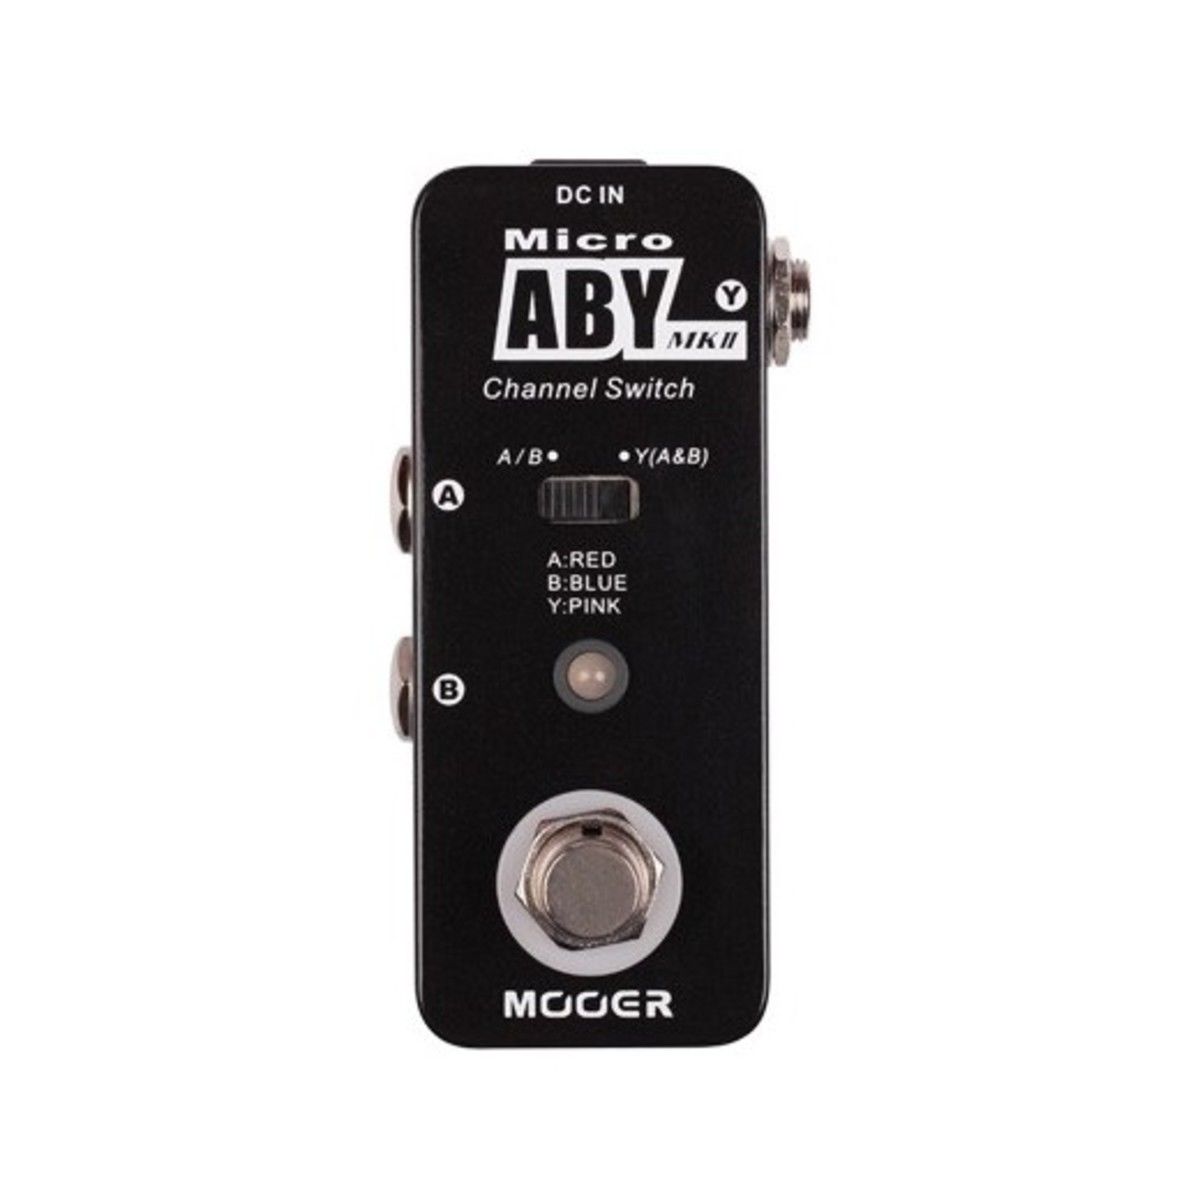   Mooer Micro ABY (MKII)